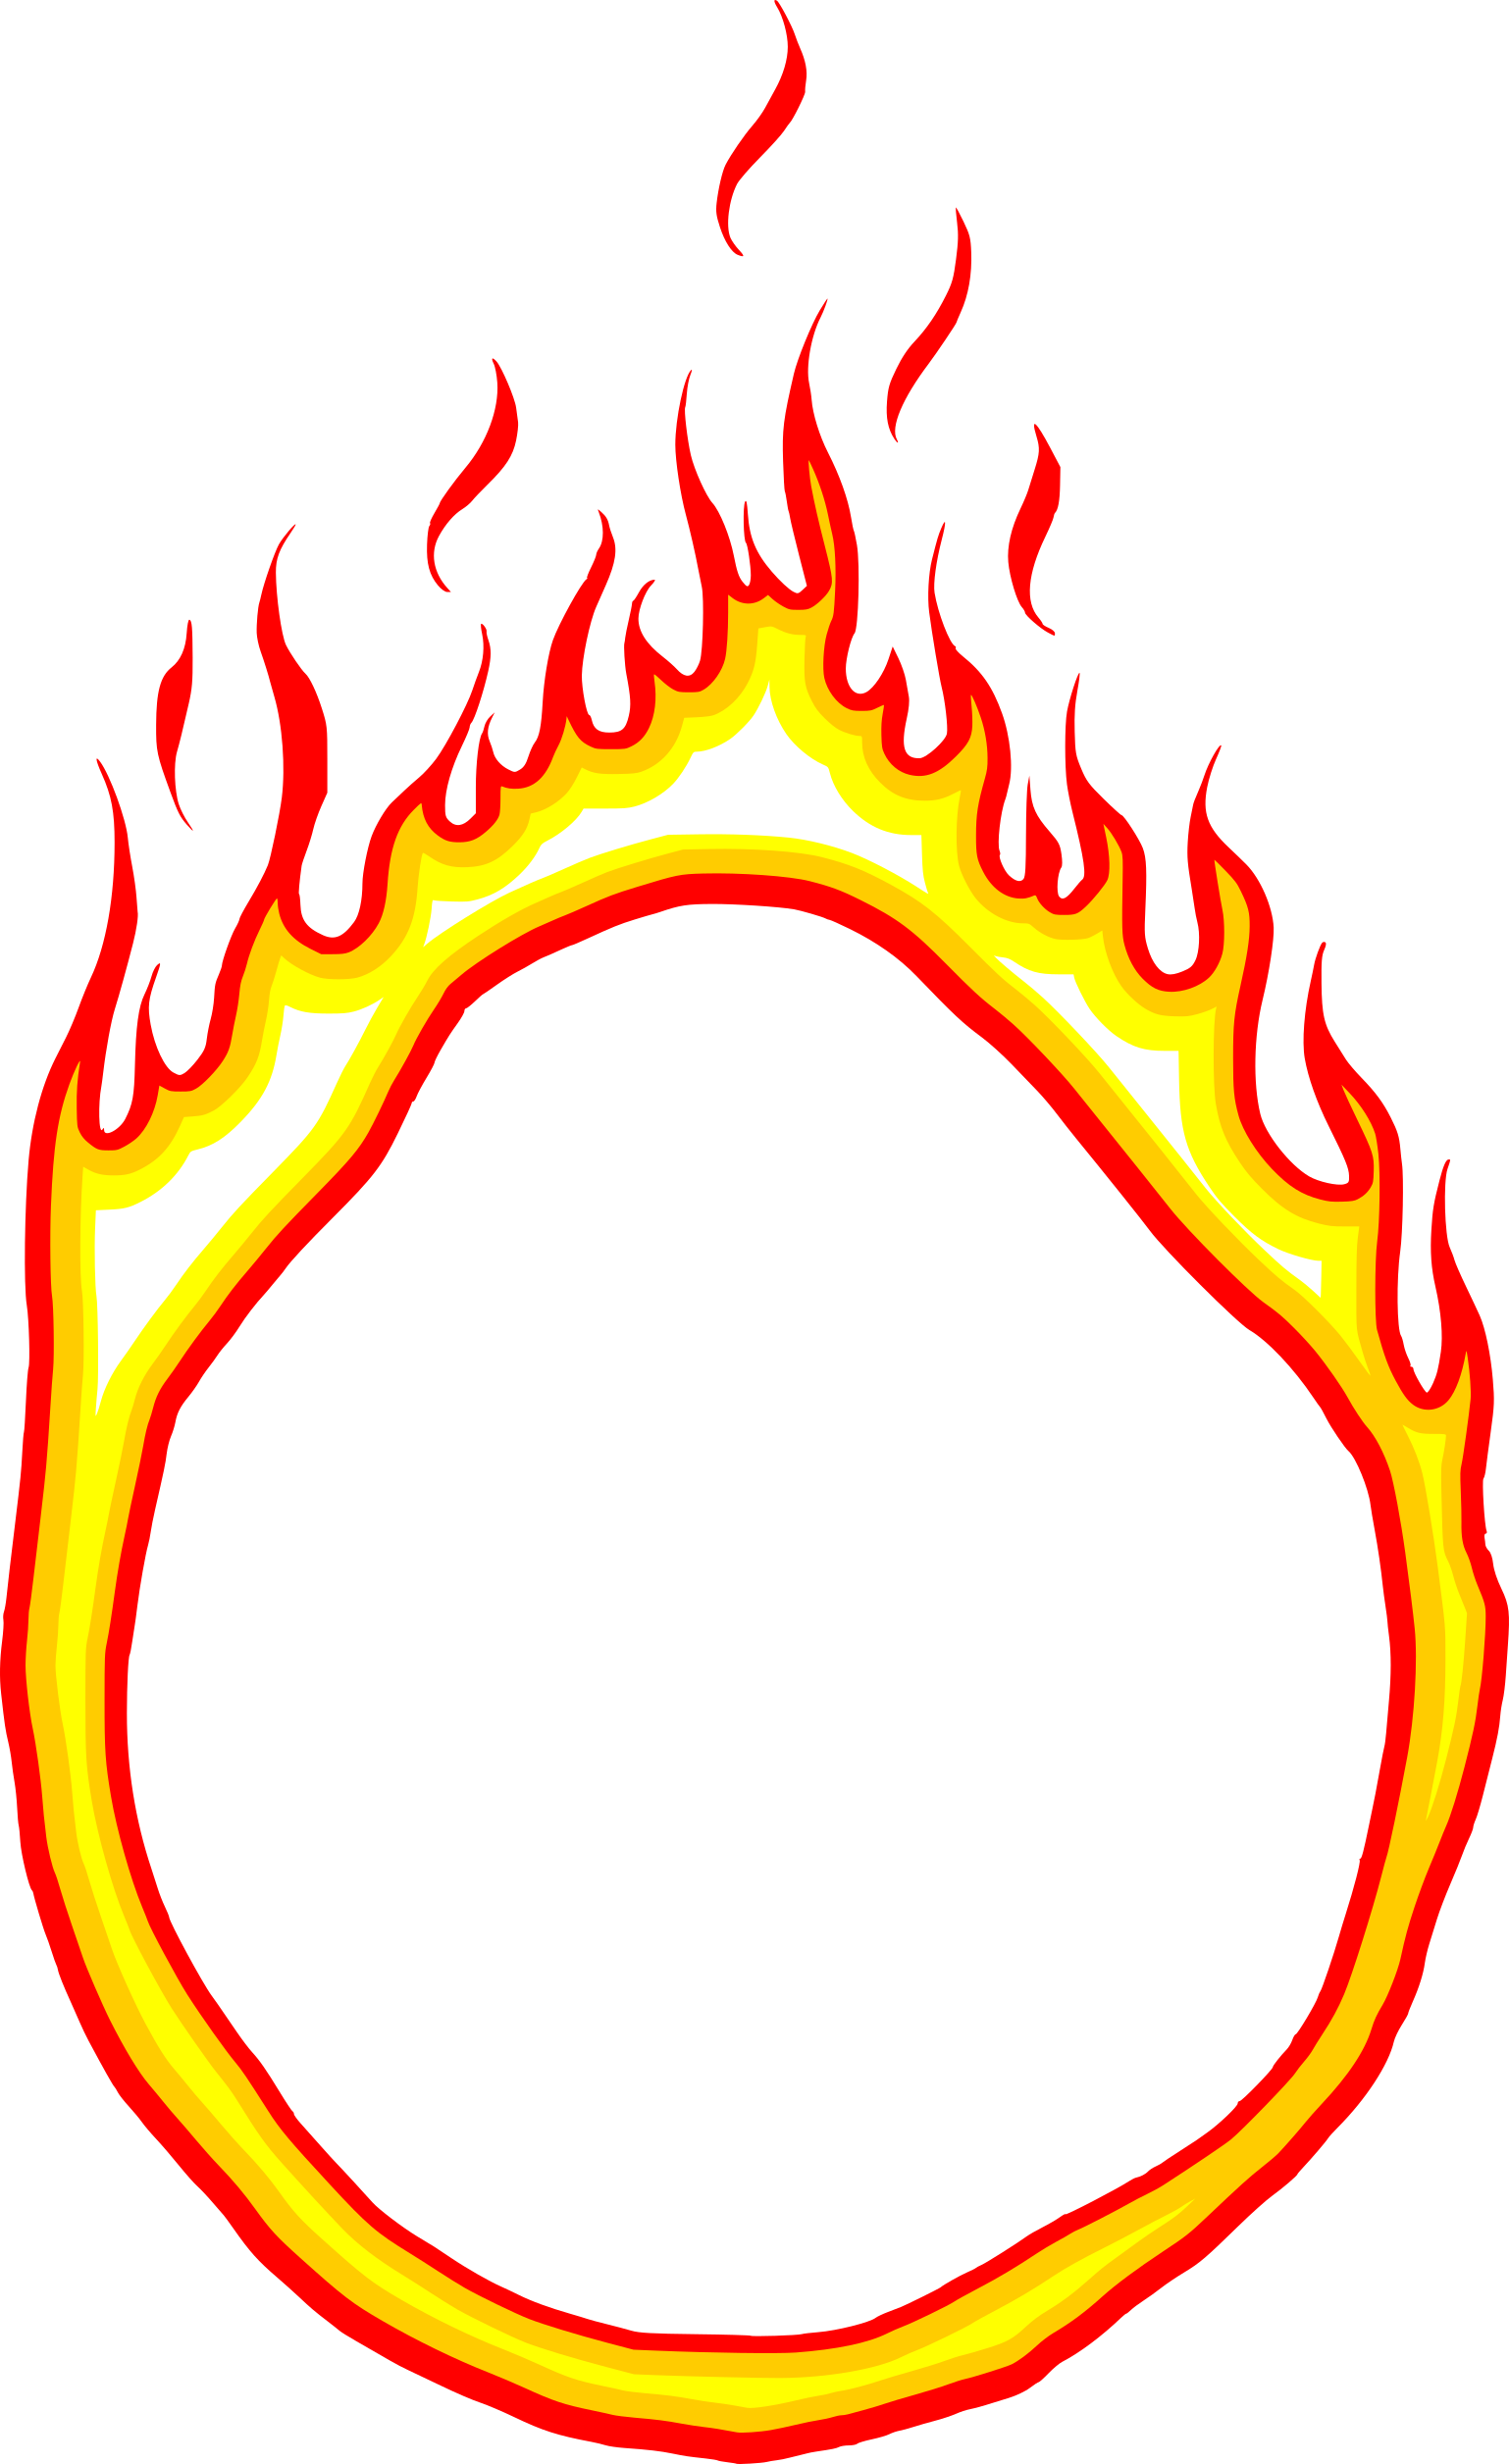 Fire Circle Flame Free Download PNG HQ PNG Image